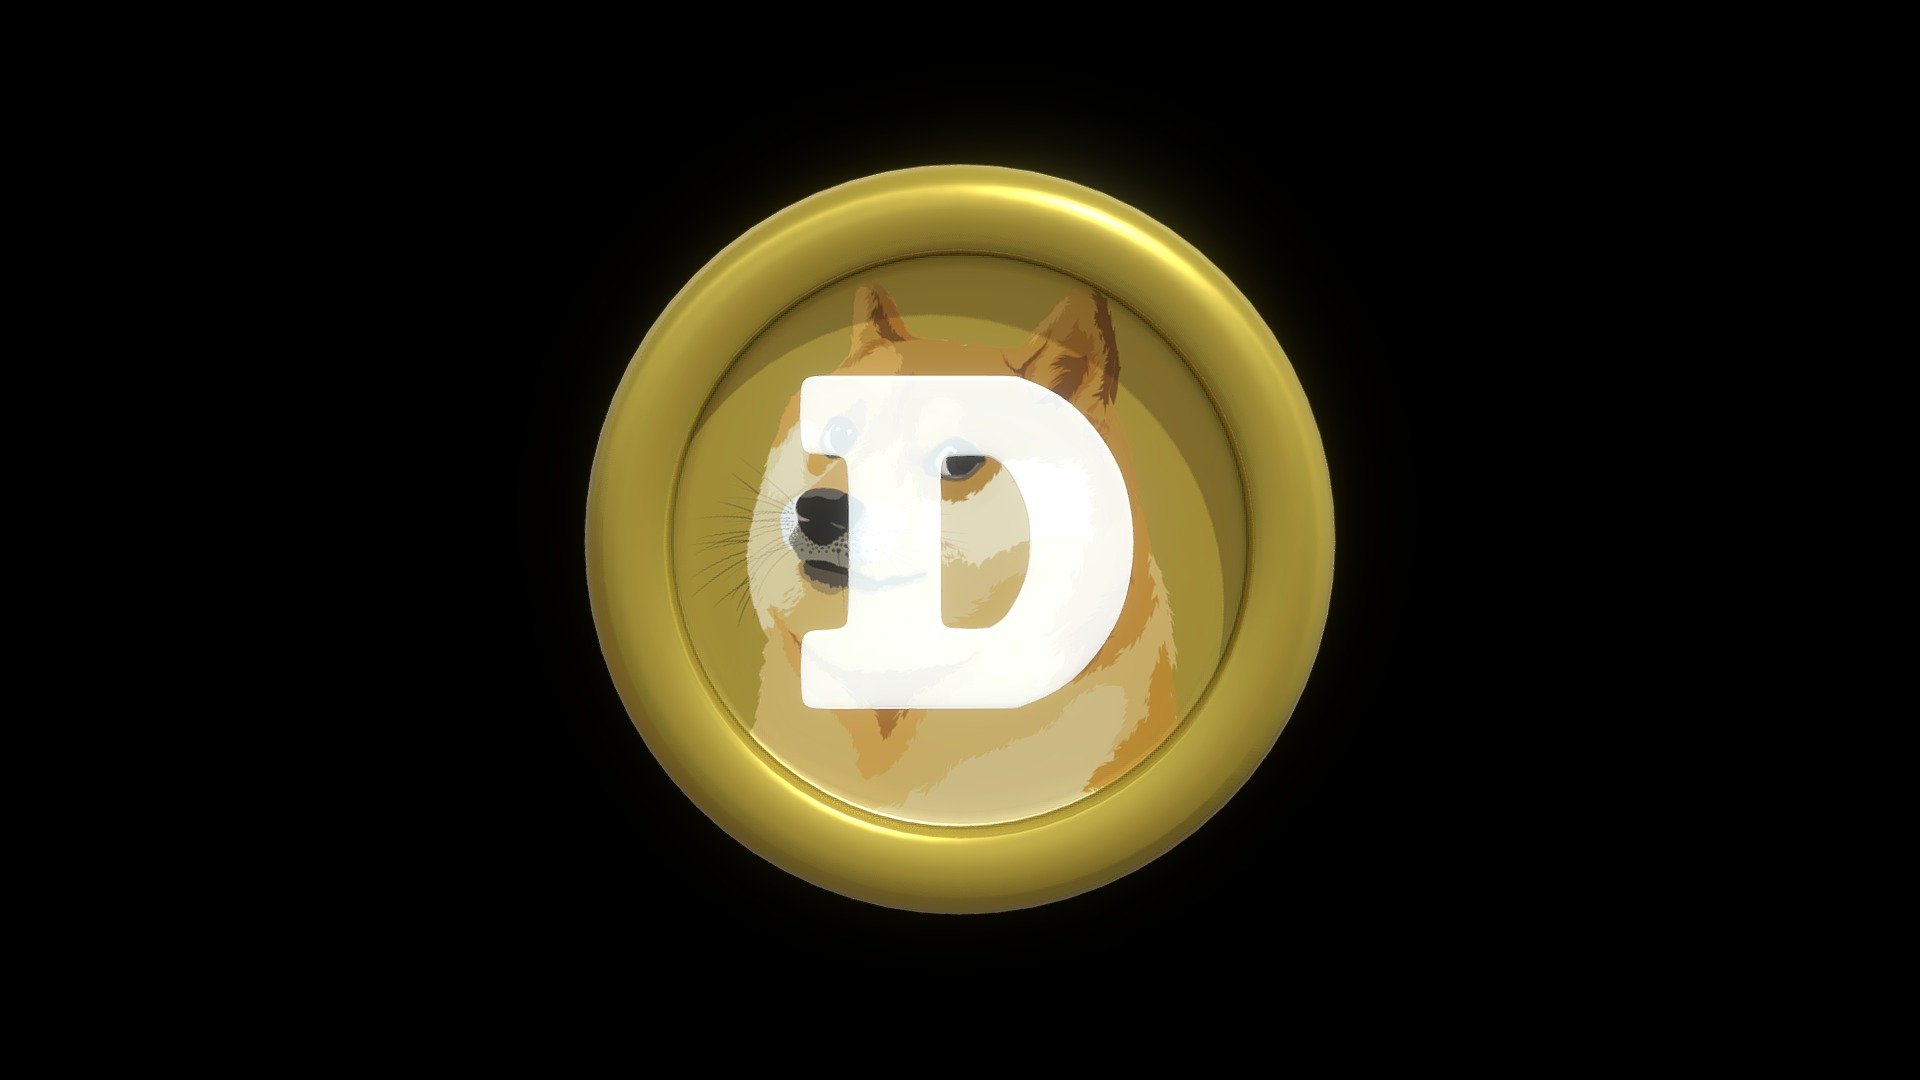 3D Dogecoin or DOGE Gold Crypto Coin with cartoon style Made in Blender 3.3.1

This model does include a TEXTURE, DIFFUSE, METALLIC, OPACITY, AND ROUGHNESS MAP, but if you want to change the color you can change it in the blend file, just use the principled bsdf and play with the Roughness, Metallic, and Base Color parameter 3d model